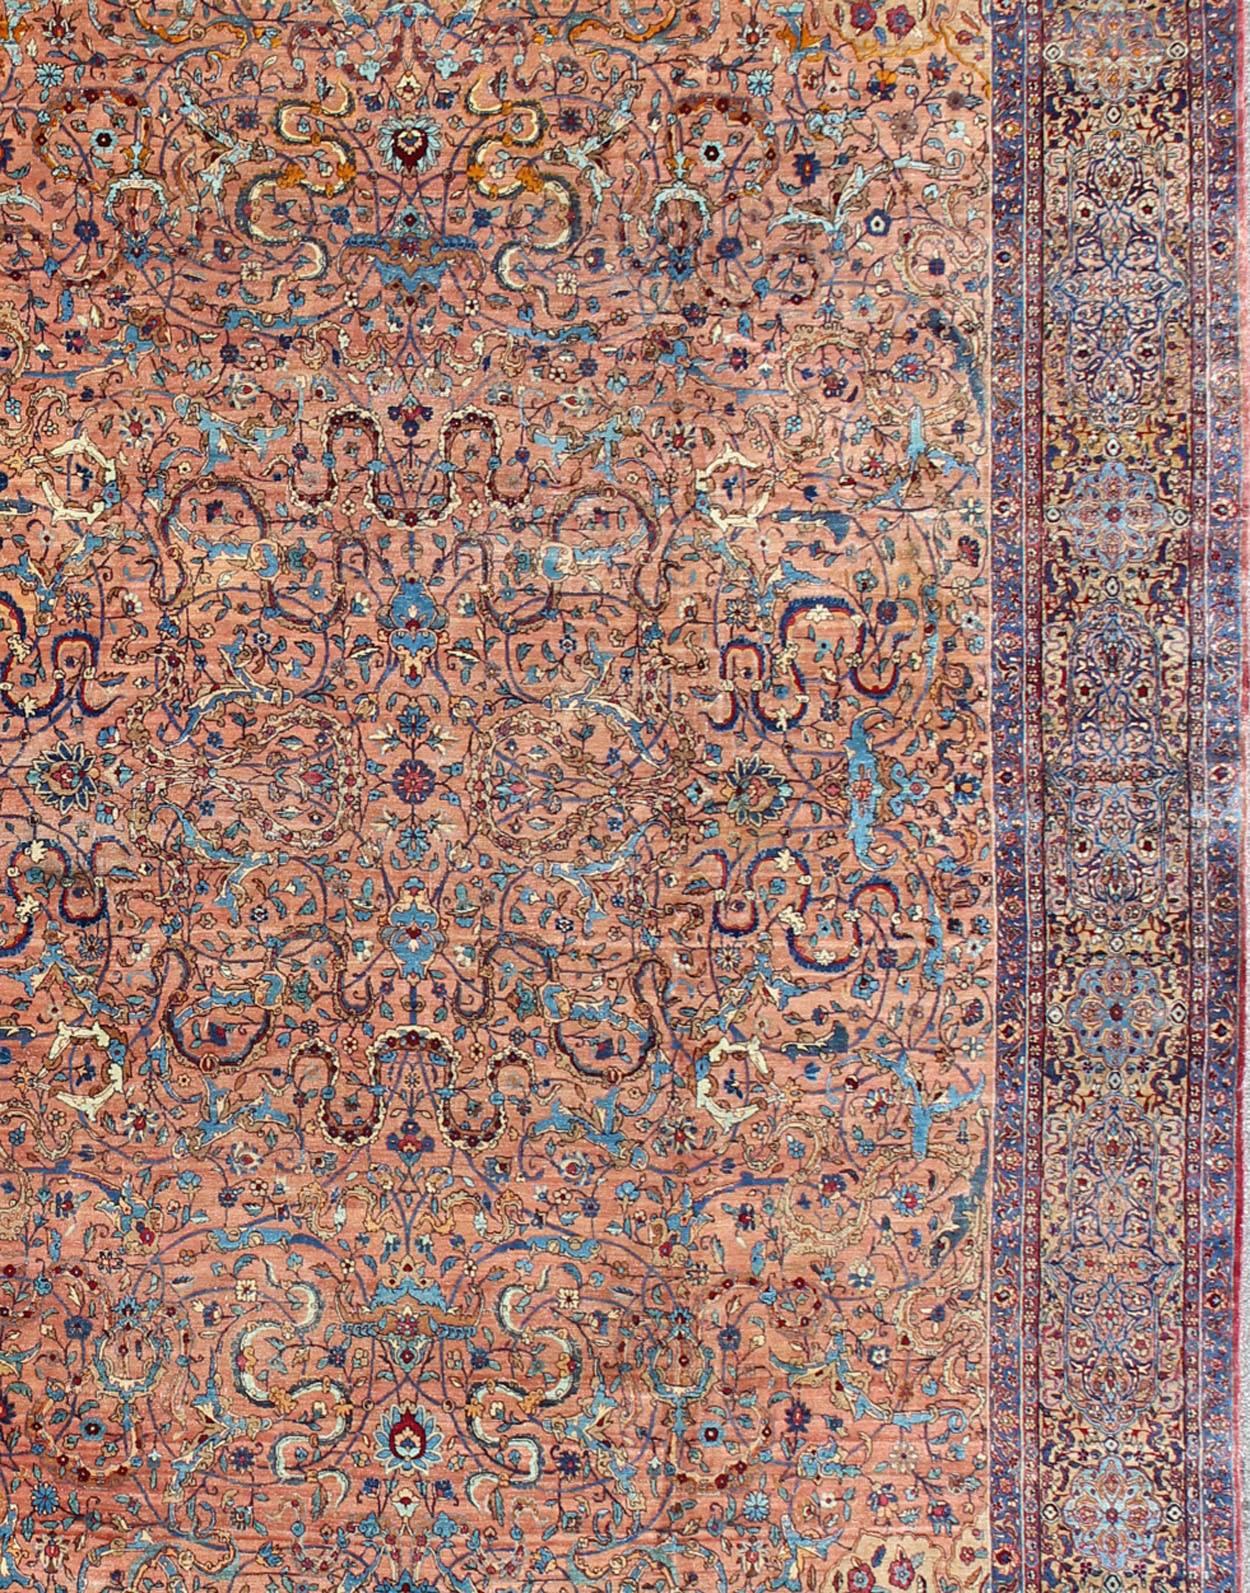 Hand-Knotted  Classic Antique Lavar Kerman Large Persian Rug with amazing intricacy